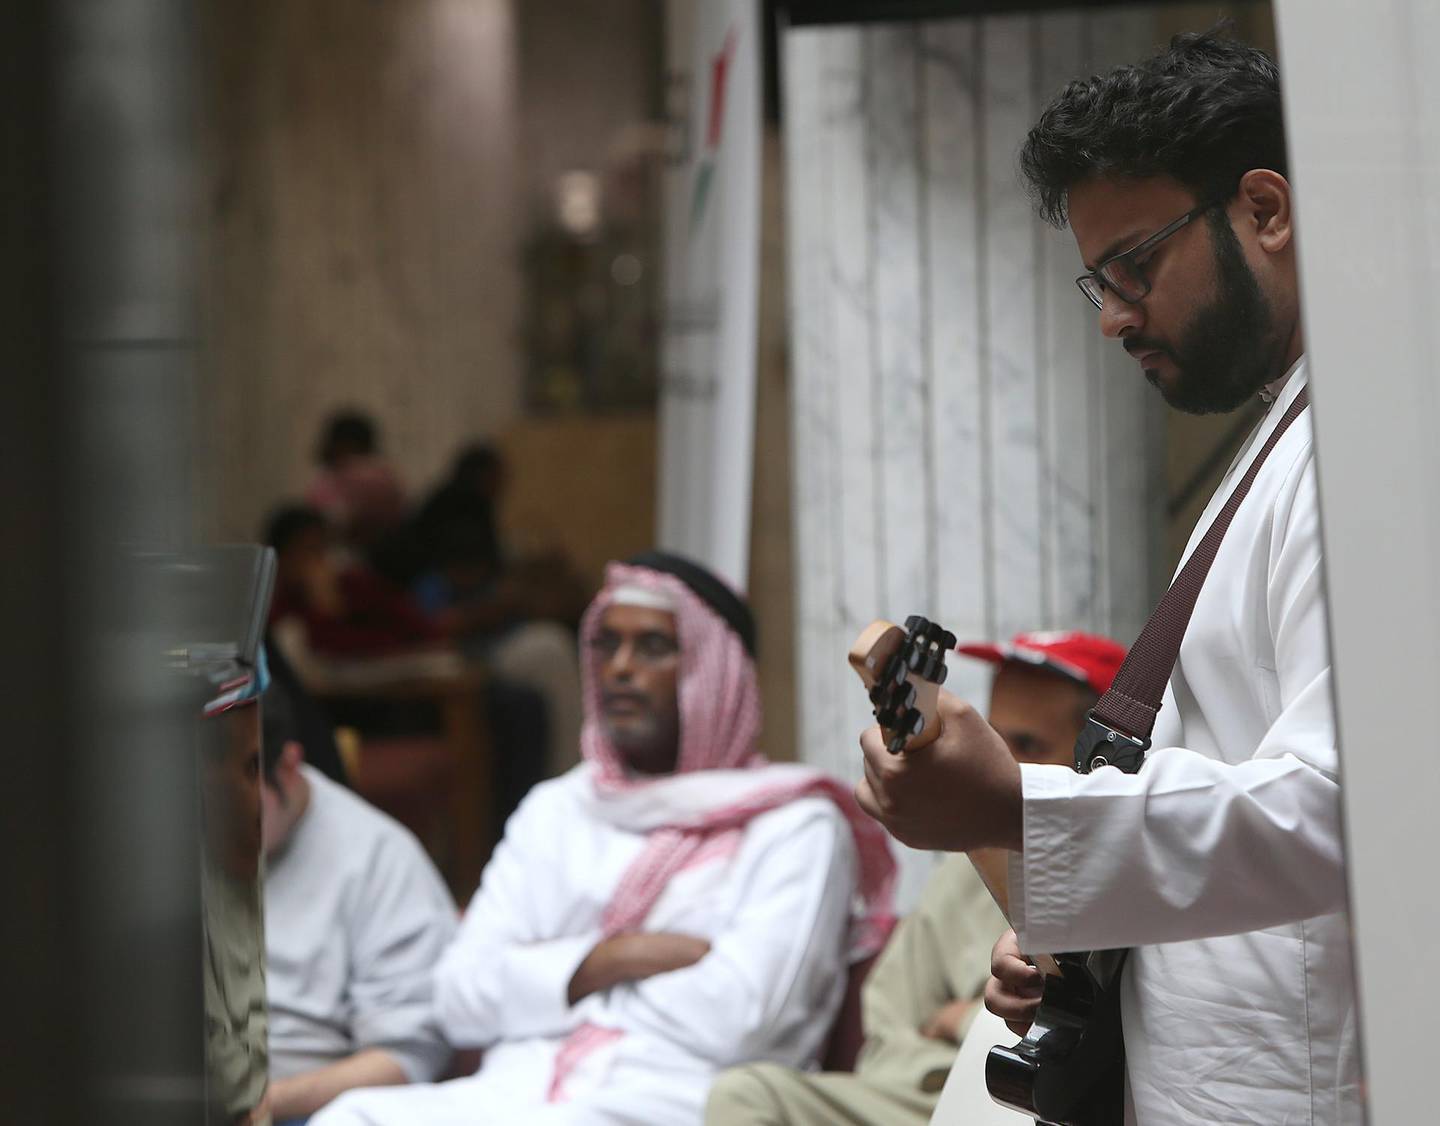 ABU DHABI - UNITED ARAB EMIRATES - 04APRIL2016 - Mohammed Al Awadi on gitar performing Music In Hospitals for patients, its the first event in Abu Dhabi Festival's month-long community & education programme held at Sheikh Khalifa Medical City (SKMC) yesterday in Abu Dhabi. Ravindranath K / The National (for News)
ID: 93523
 *** Local Caption ***  RK0404-music14.jpg